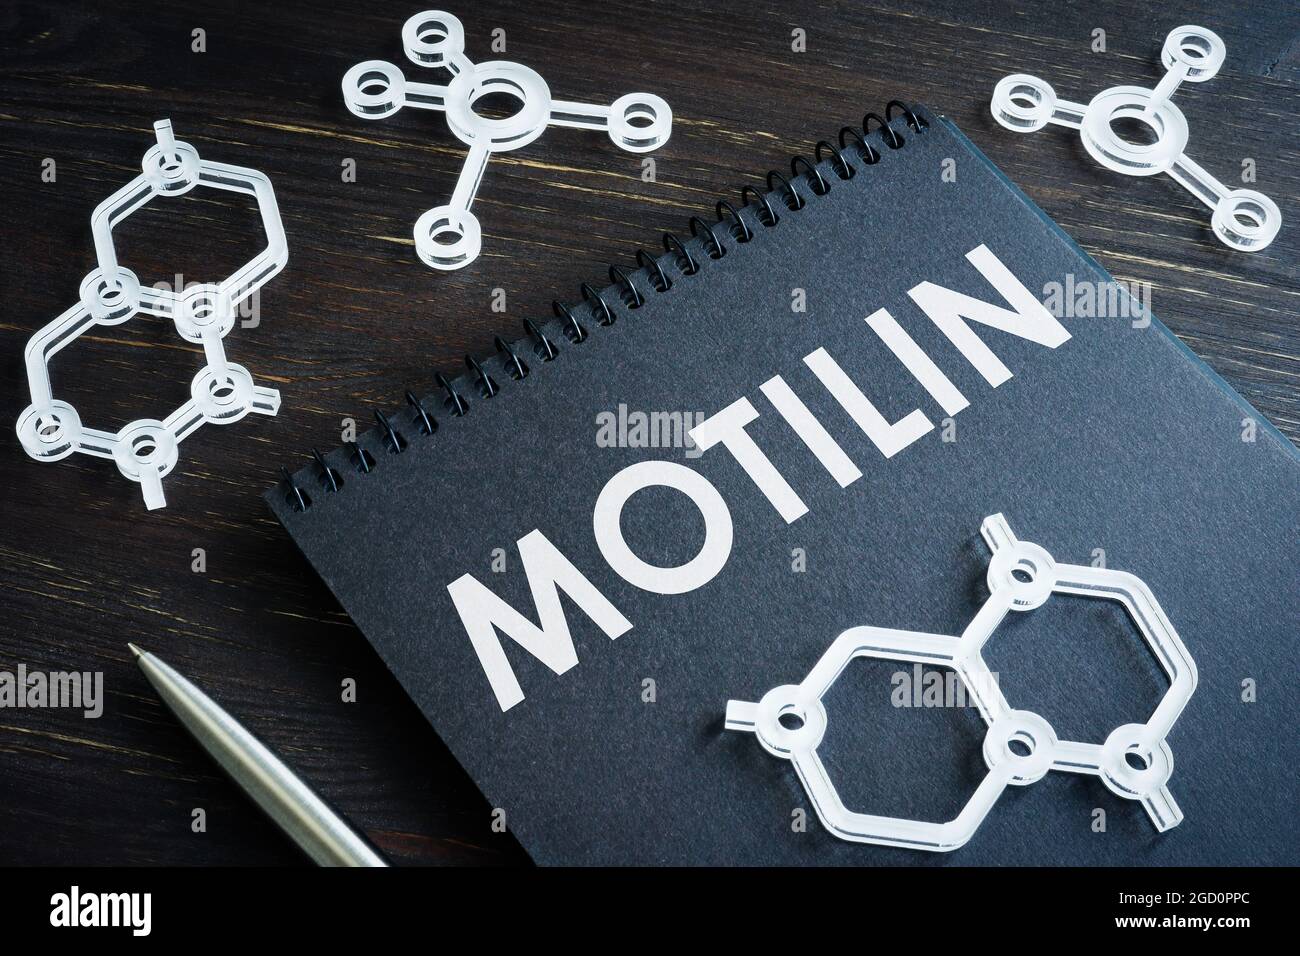 Information about motilin hormone in the dark notepad. Stock Photo